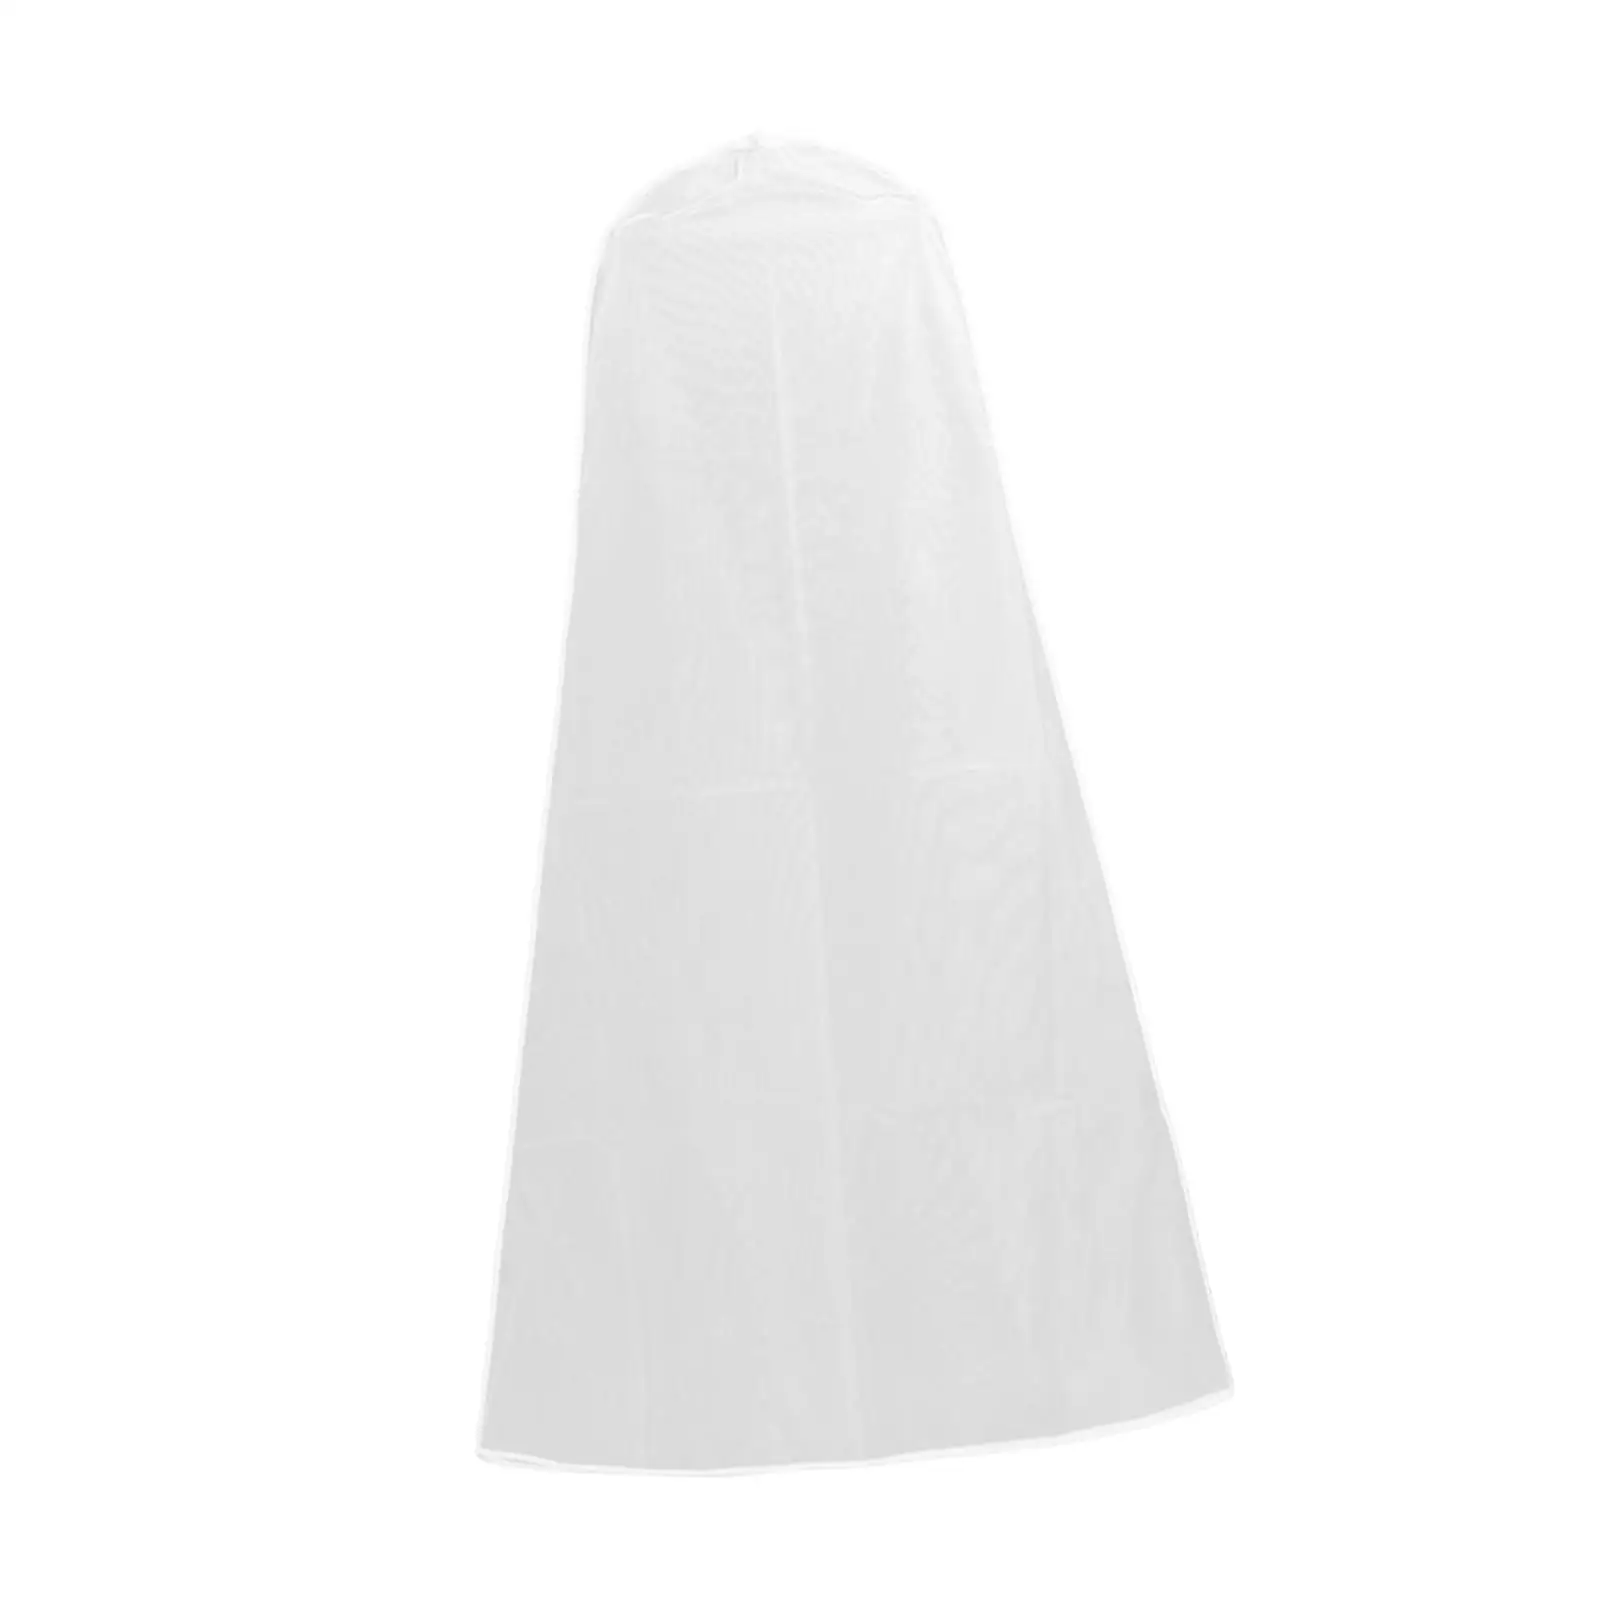 Wedding Dress Garment Bag Cover for Evening Gown Windbreakers Down Jackets